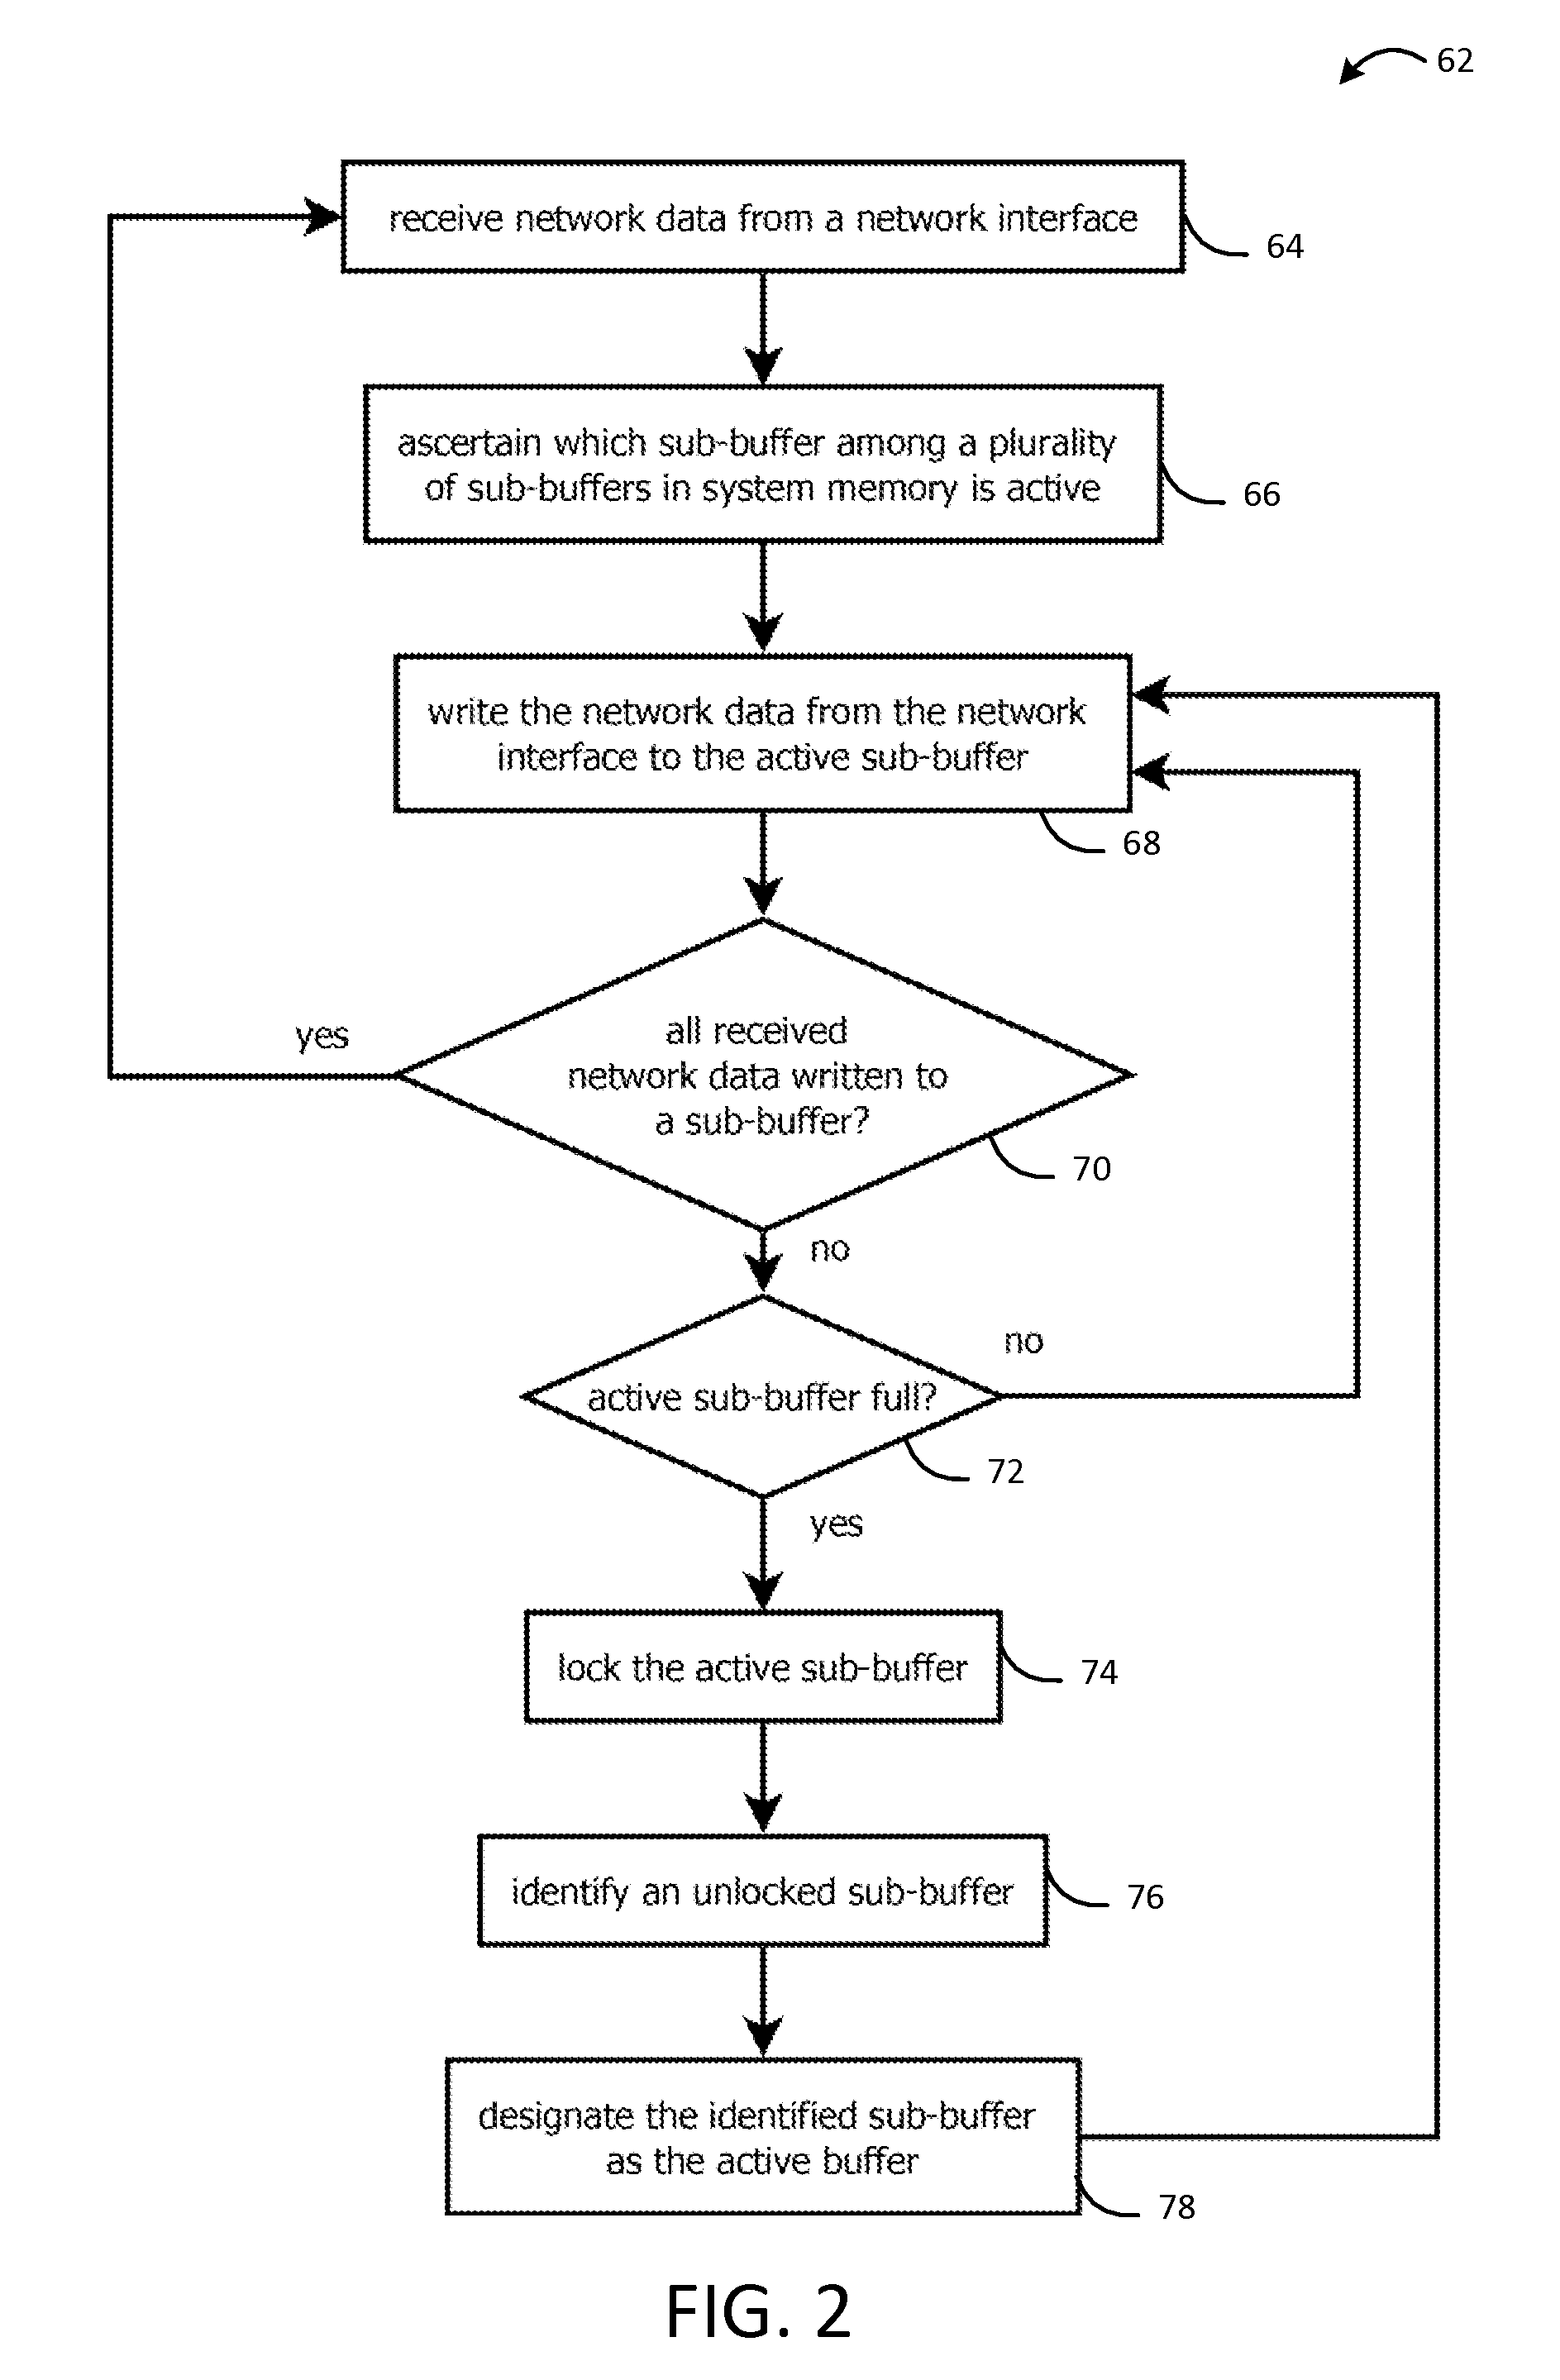 Systems and methods for capturing, replaying, or analyzing time-series data